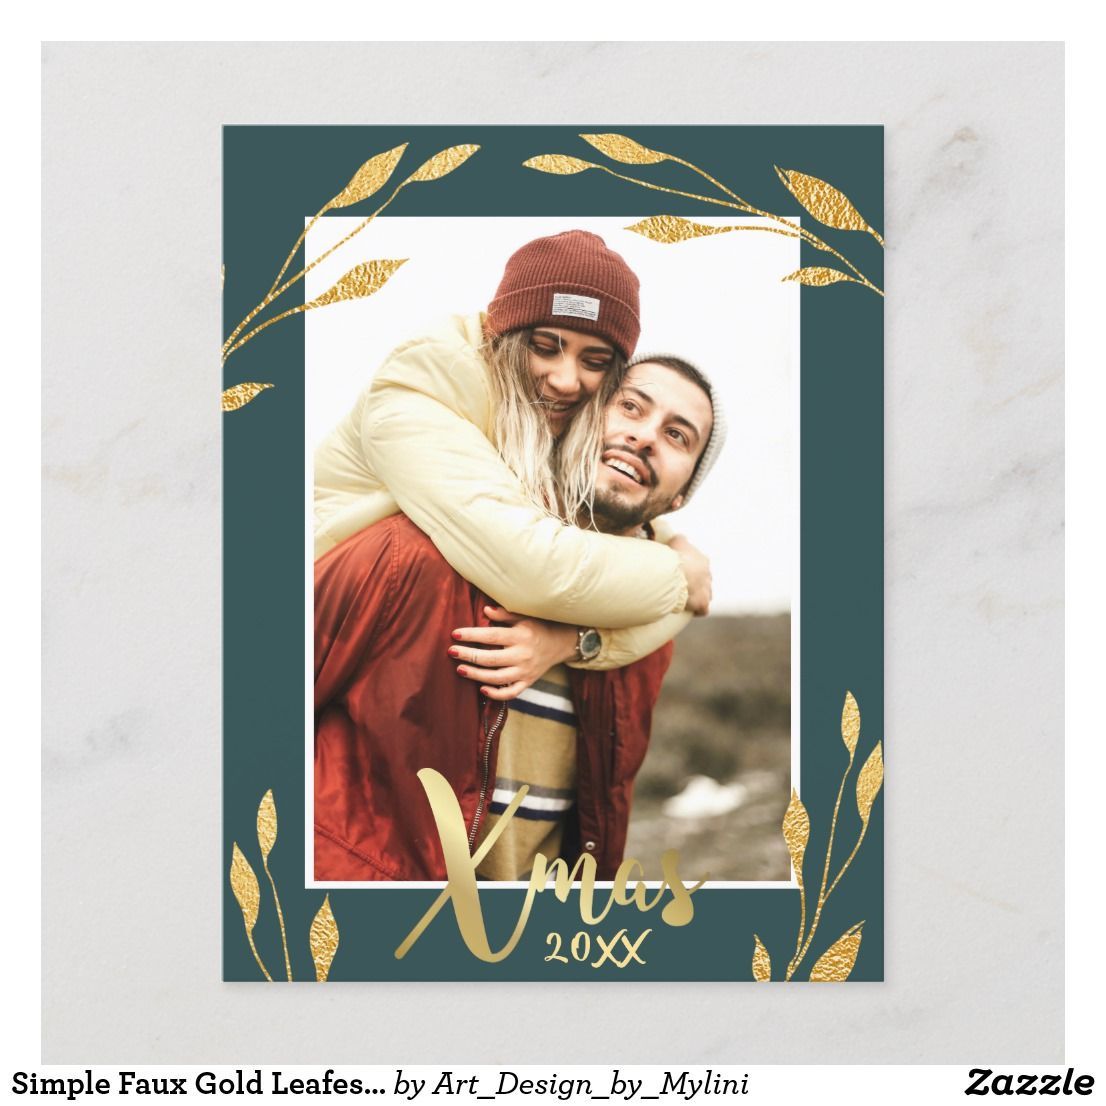 Simple Faux Gold Leafes Christmas Photo Greetings Holiday Postcard | Zazzle.com -   22 holiday Photos simple ideas